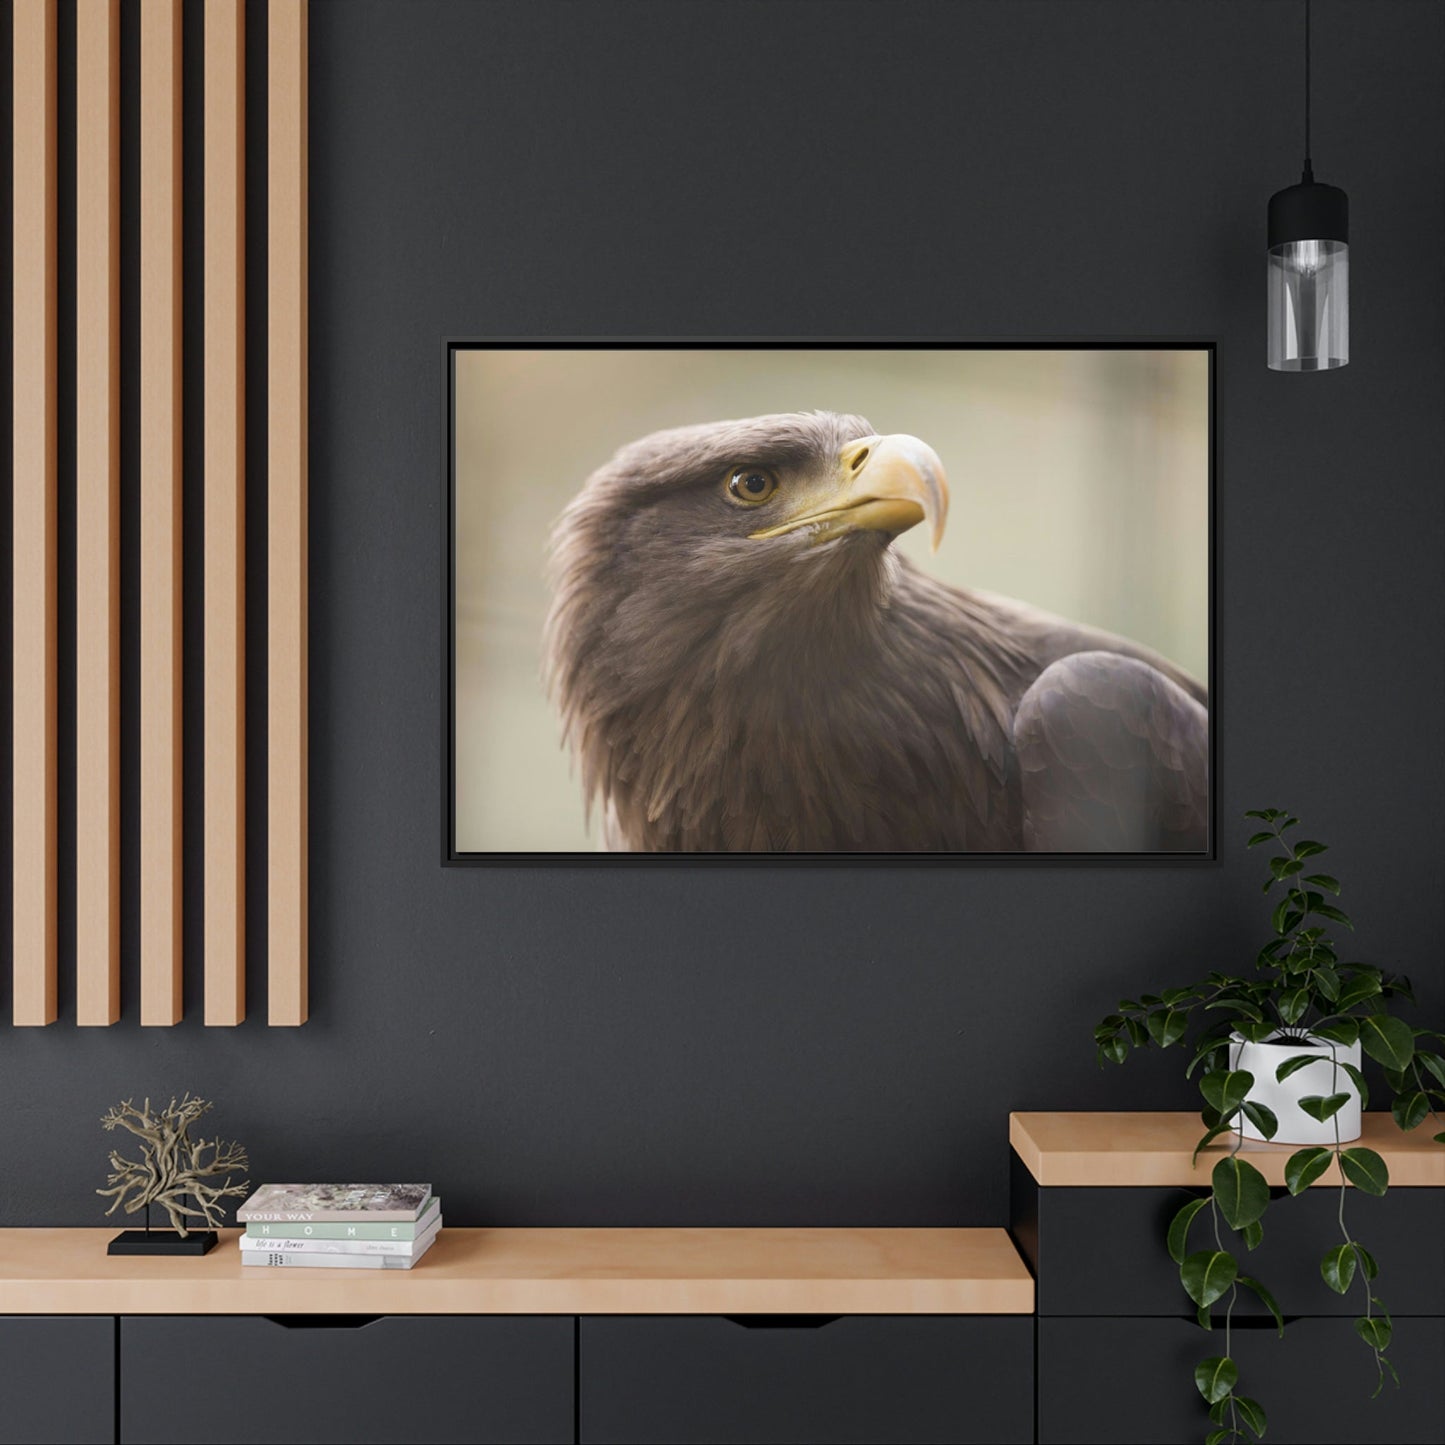 Flight of Wonder: Wall Art Enthralling with the Mystique of Eagles in Flight